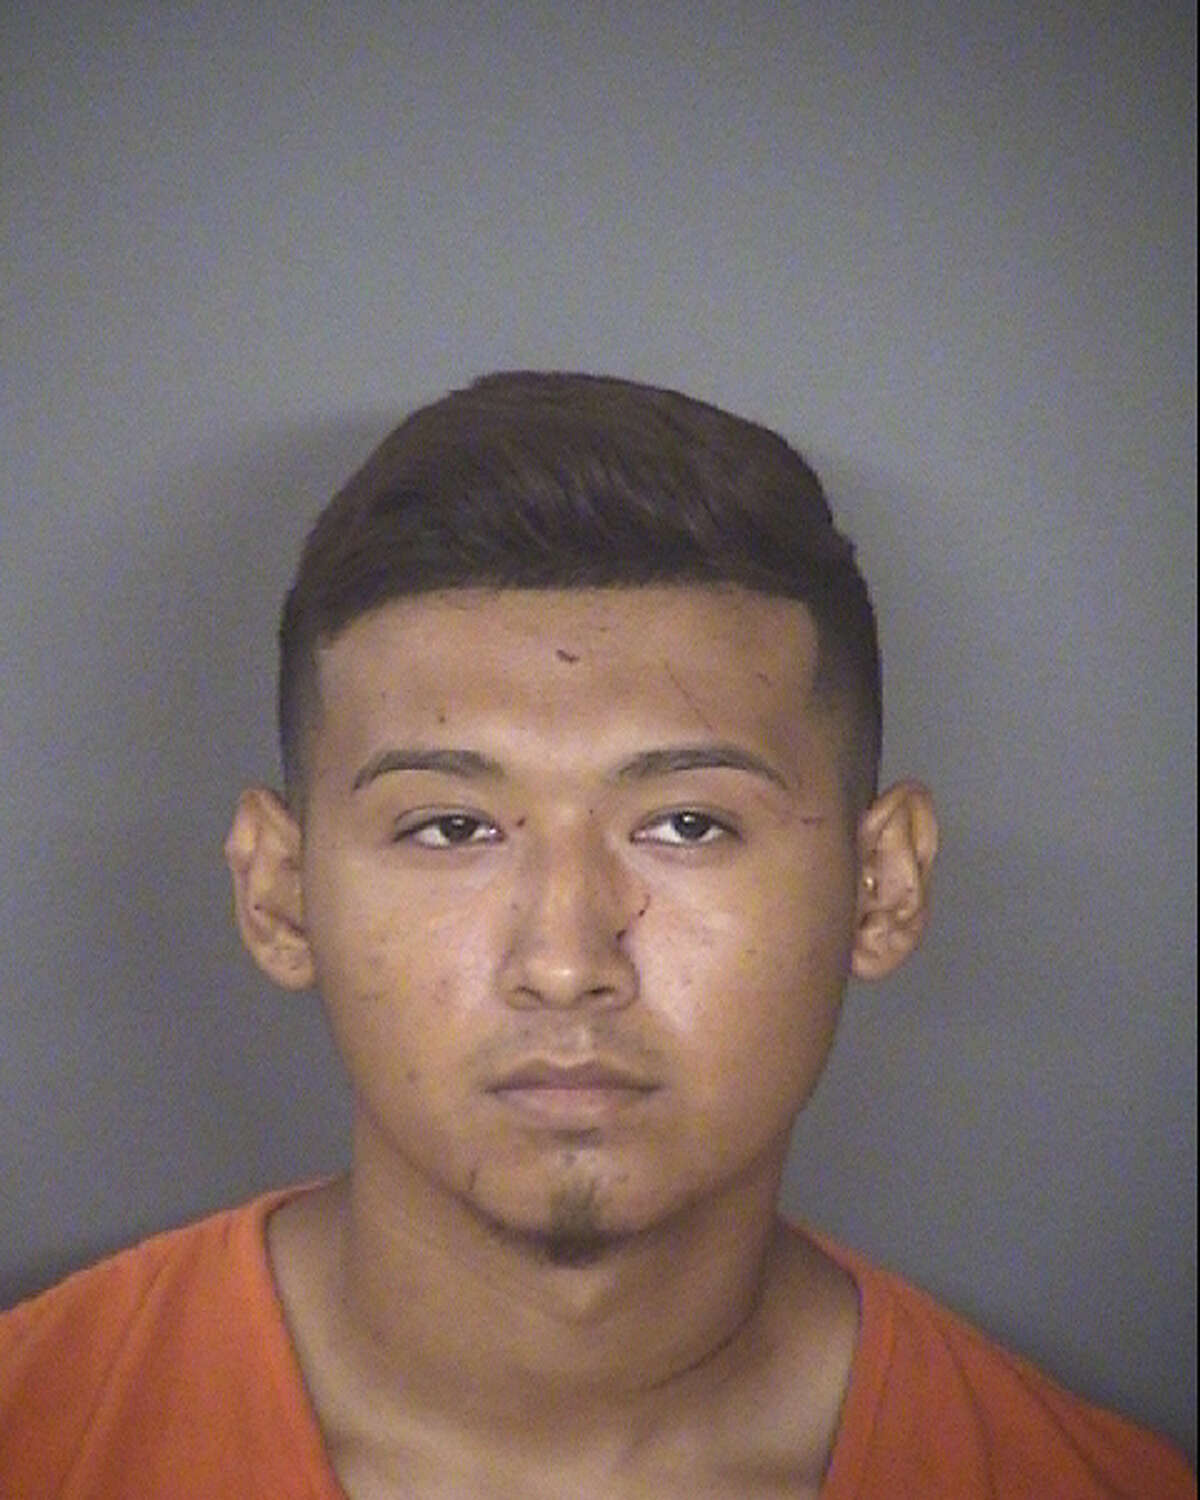 Joshua Garcia, 23, was sentenced to 35 years in prison Wednesday for the 2018 murder of his teenage girlfriend.